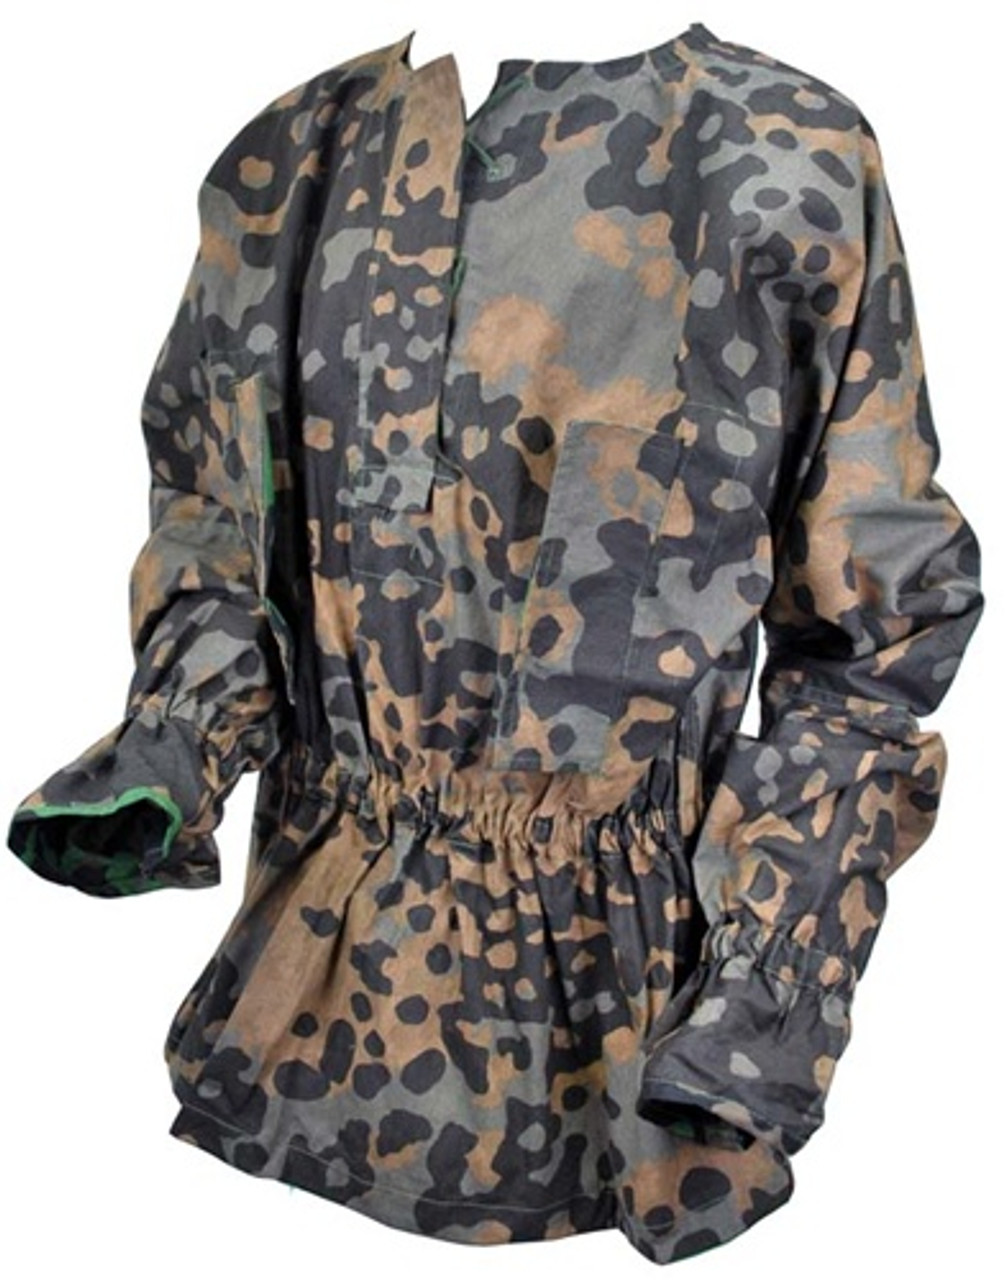 SS M40 Plain Tree Camouflage Smock from Hessen Antique